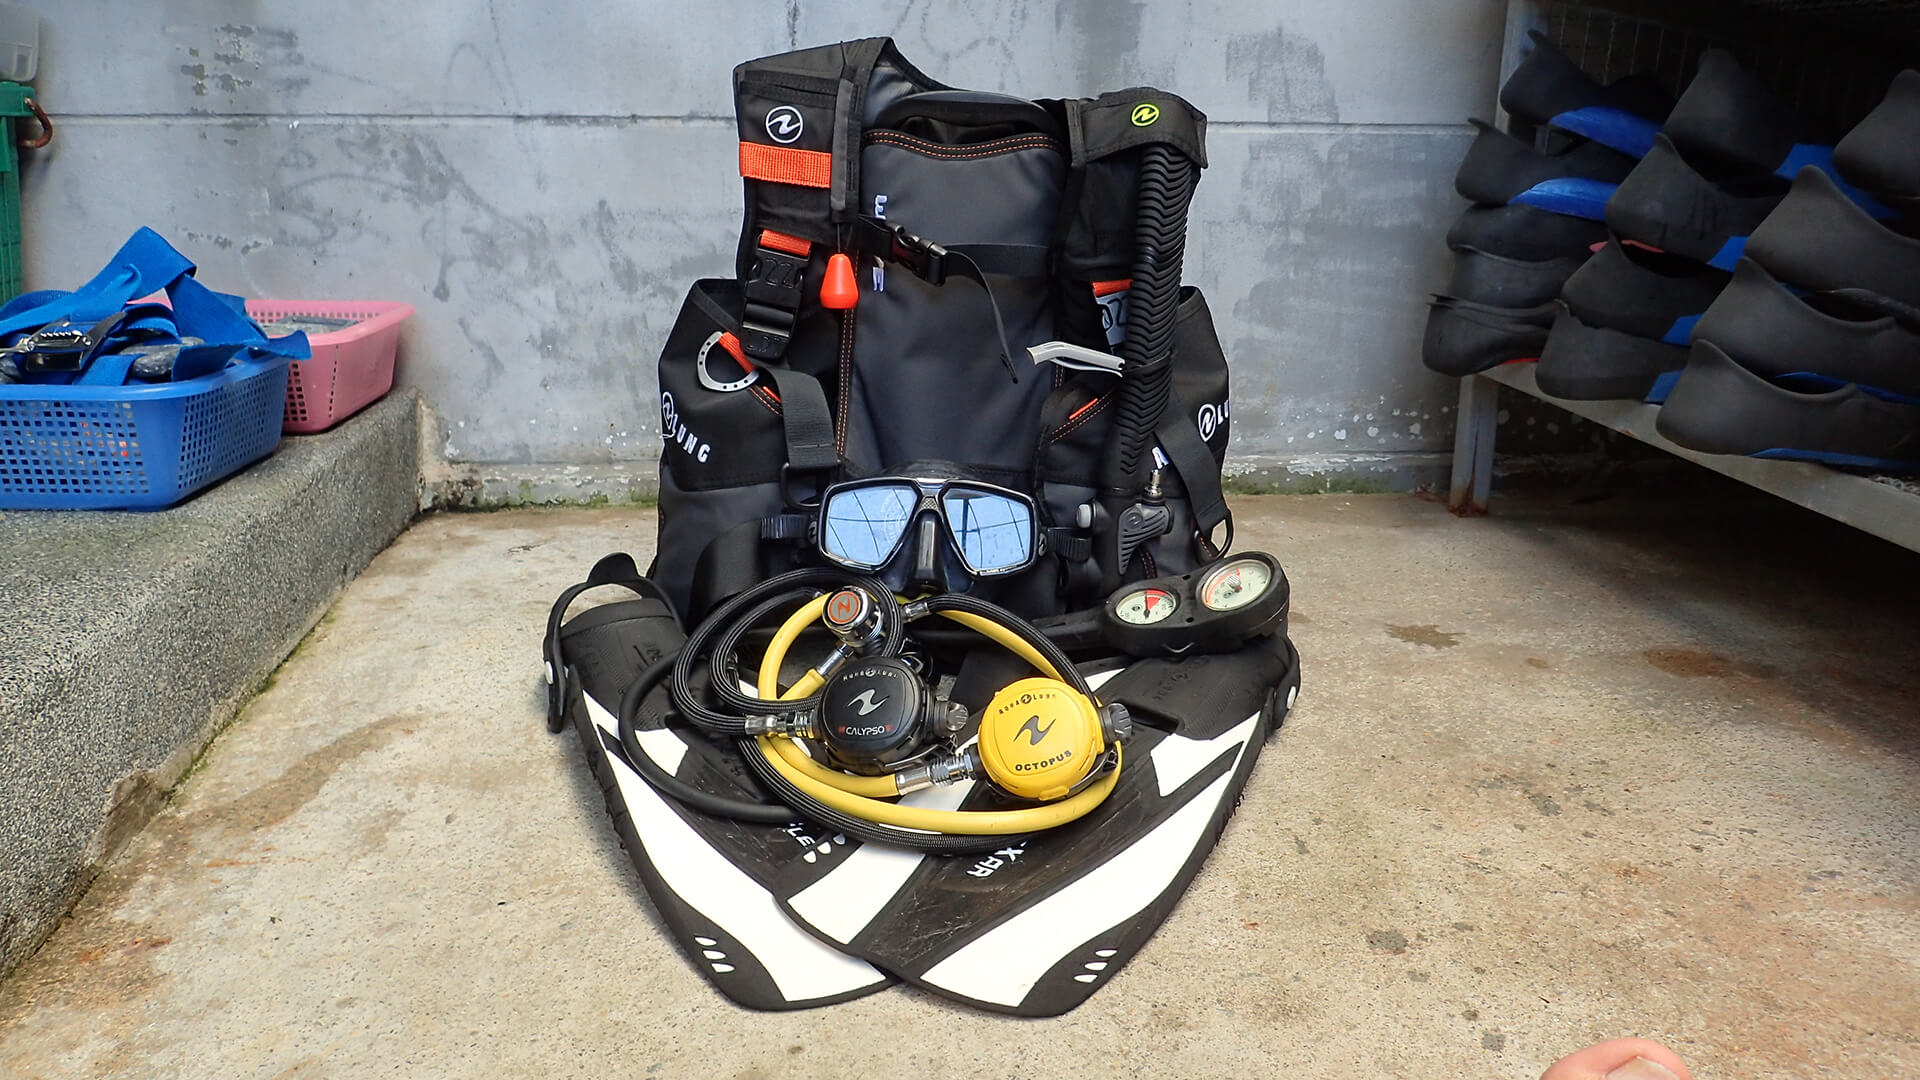 Renting Scuba Equipment Or Bring Your own?